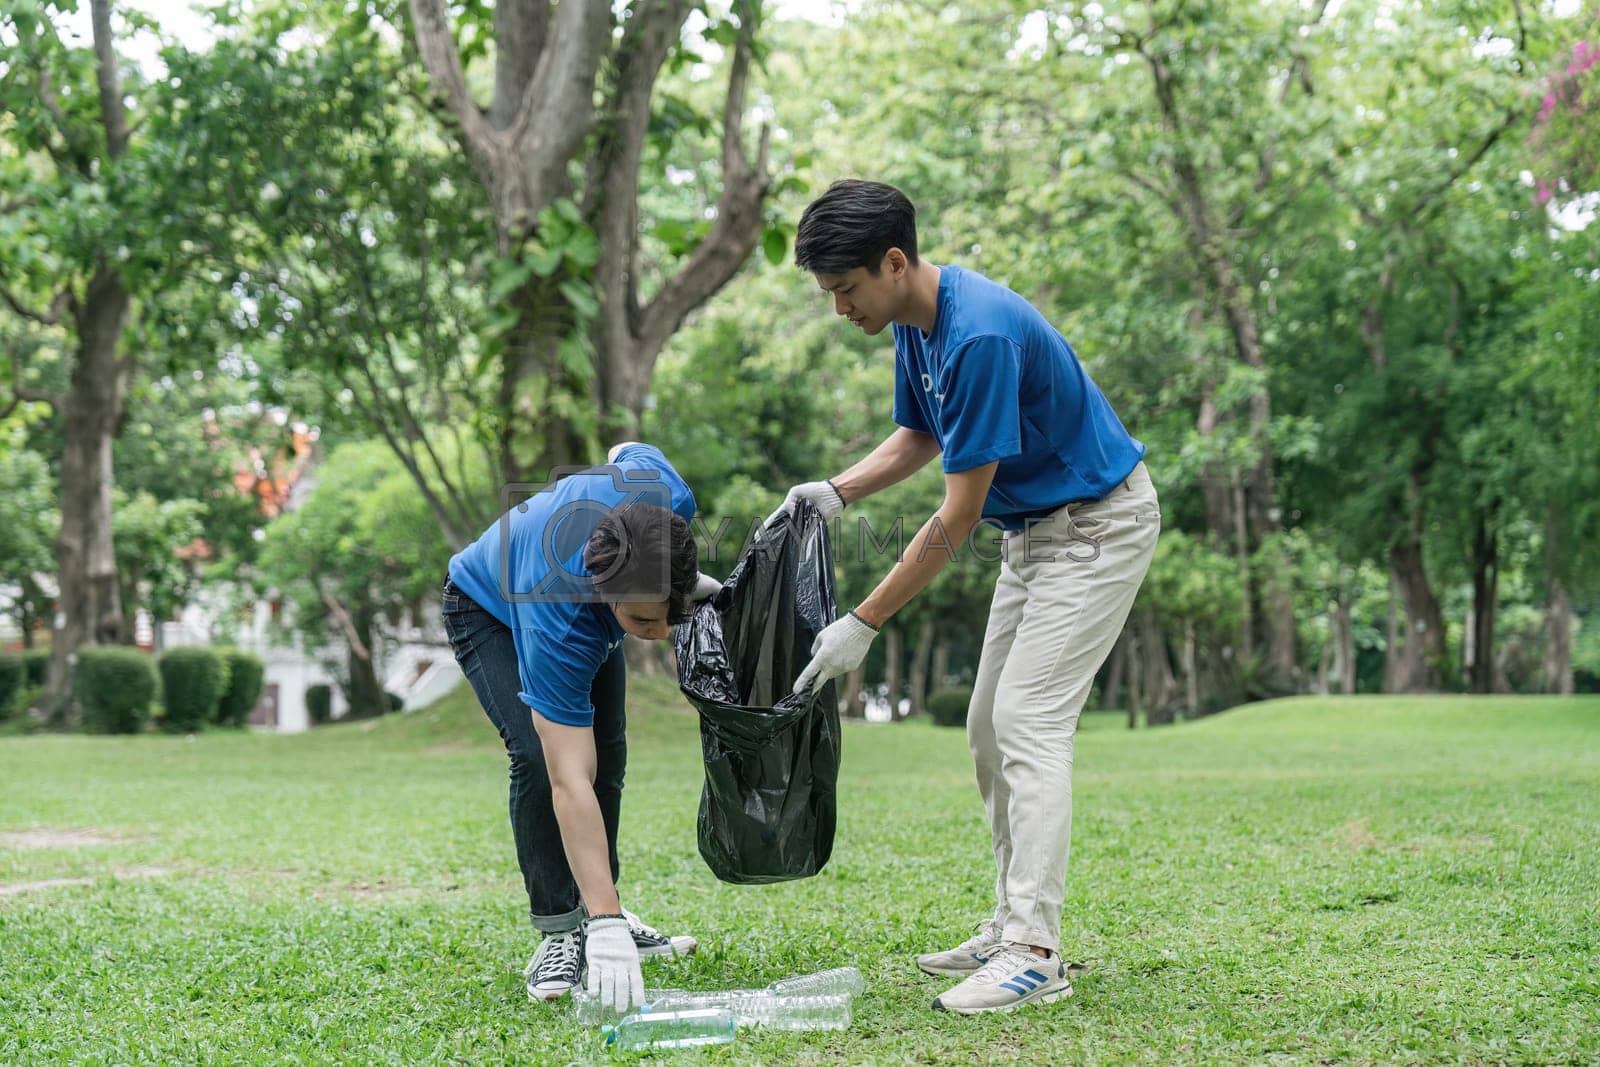 Royalty free image of volunteering, charity, cleaning, young and ecology concept group of happy volunteers with garbage bags cleaning area by nateemee